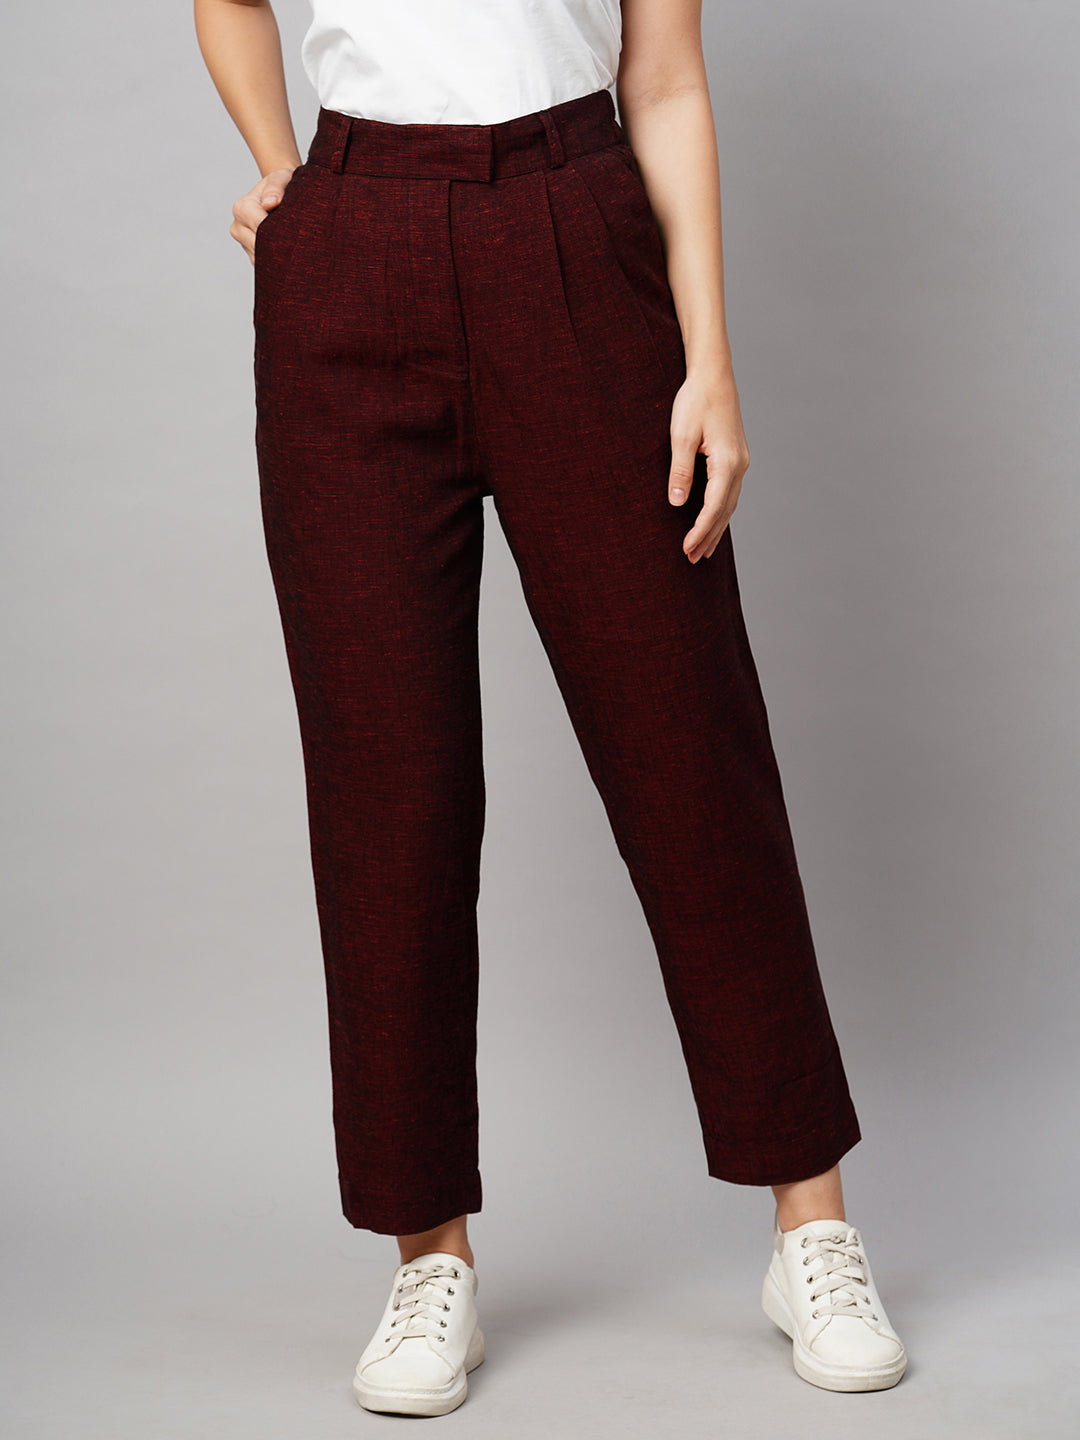 Women's Maroon/Red Viscose Linen Straight Fit Pant